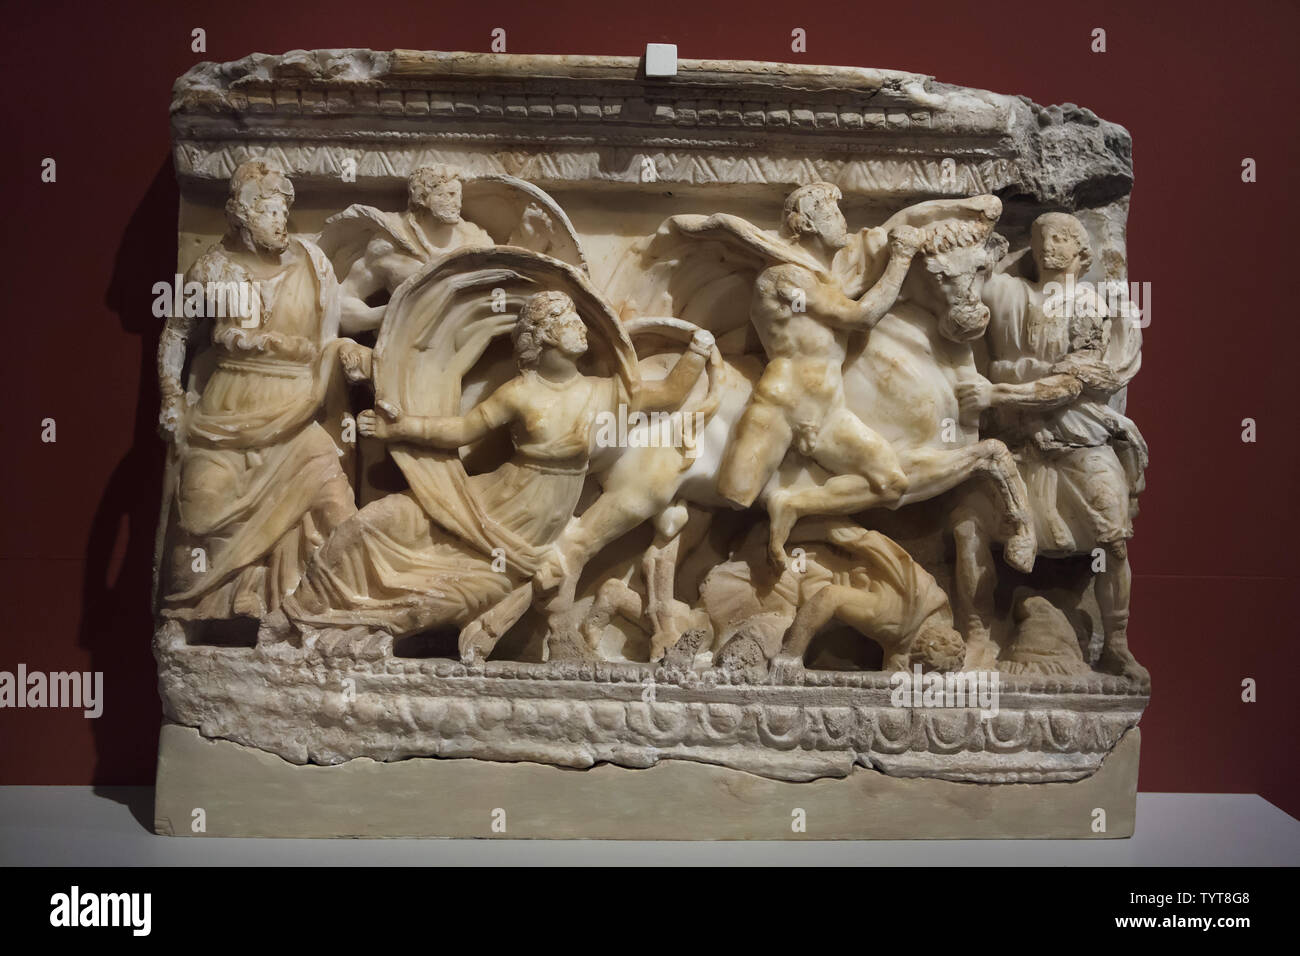 Punishment of Dirce by brothers Amphion and Zethus depicted on the front of the Etruscan alabaster cinerary urn dated from around 120-110 BC found in Volterra, Italy, now on display in the Altes Museum in Berlin, Germany. Stock Photo